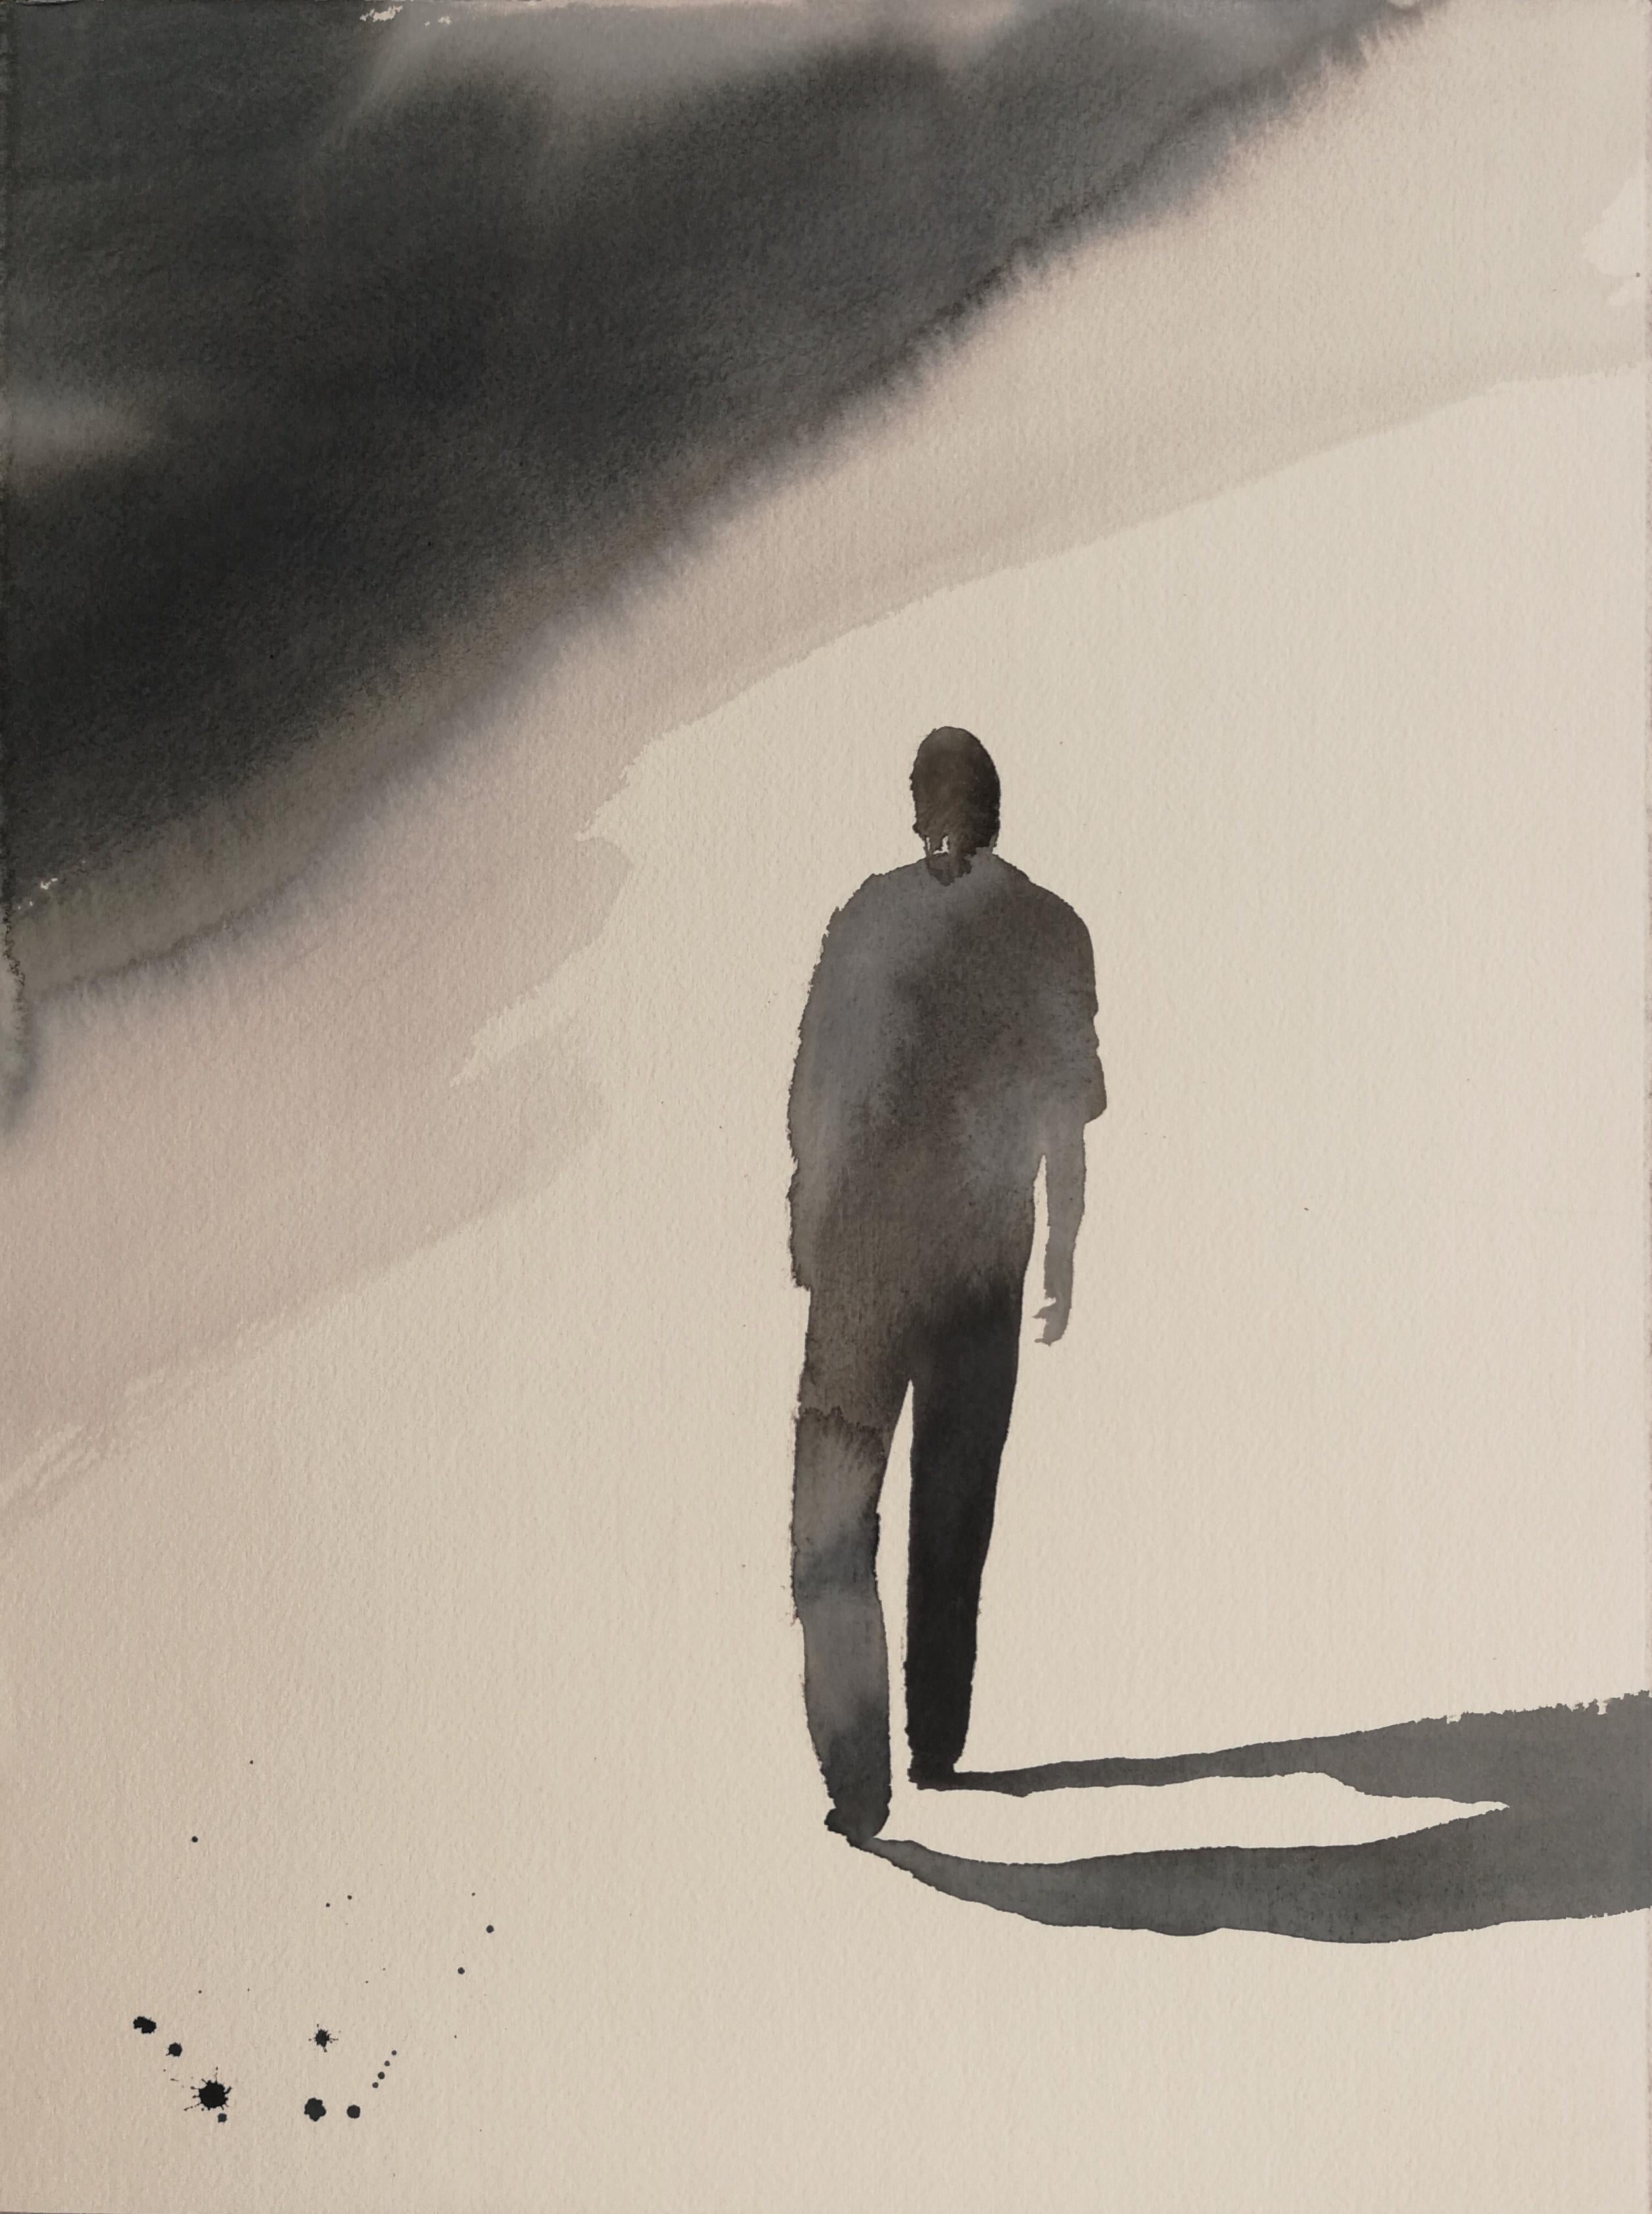 Nicola Magrin Figurative Painting - Black and white wandering man in the snow by fine italian watercolorist